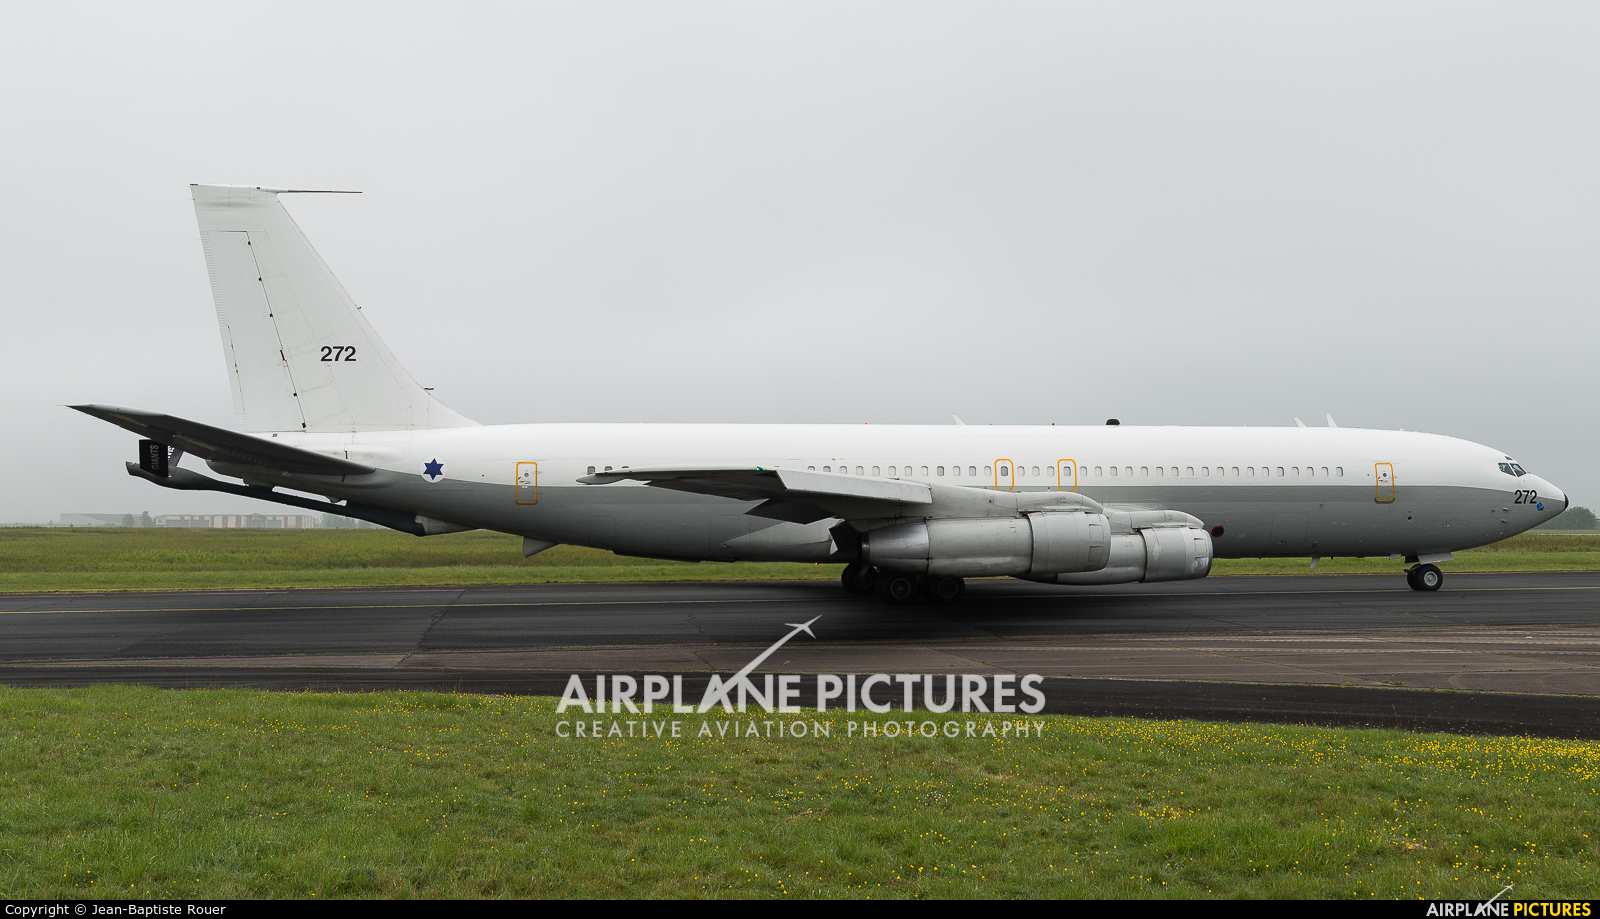 Israel - Defence Force 272 aircraft at Chateauroux - Deols (Marcel Dassault)